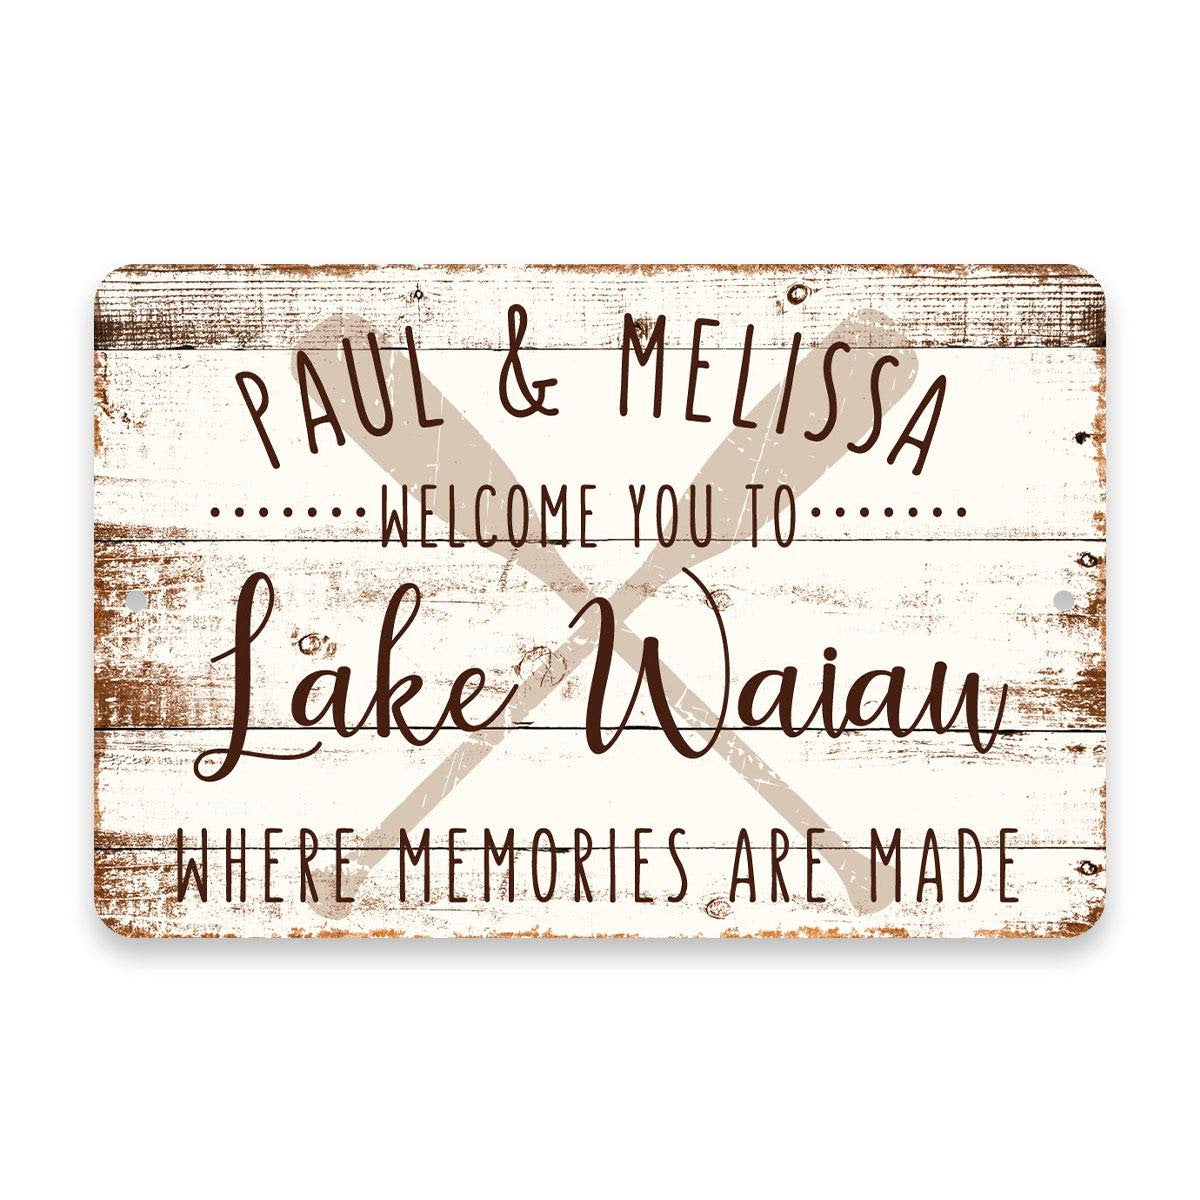 Personalized Welcome to Lake Waiau Where Memories are Made Sign - 8 X 12 Metal Sign with Wood Look